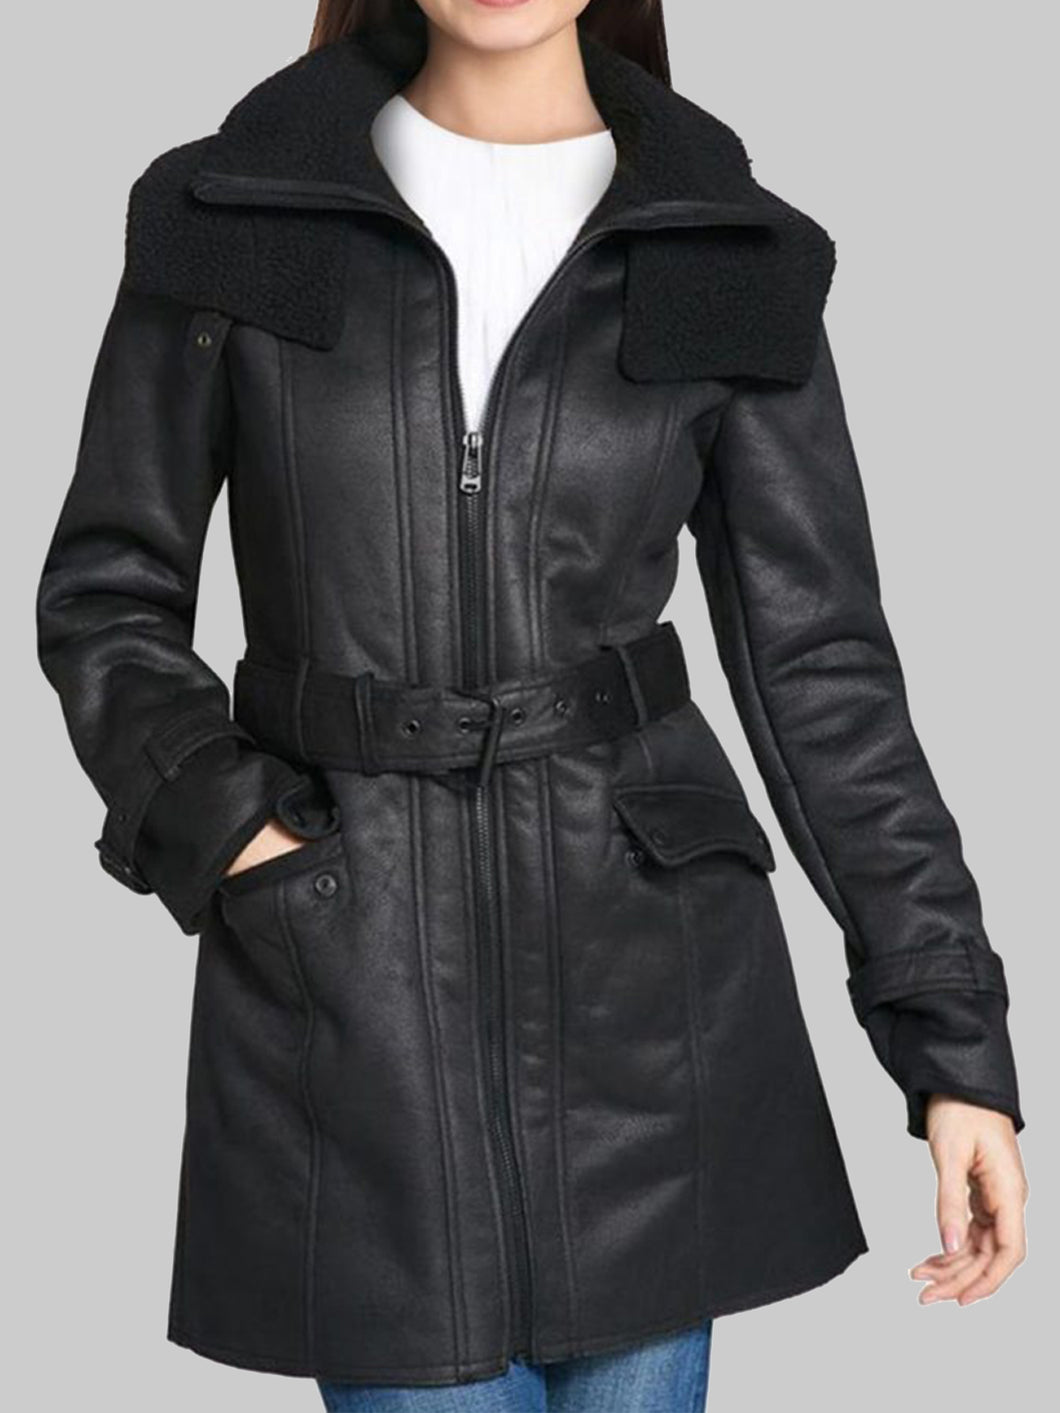 Black Shearling Duster Mid-Length Trench Coat for Women